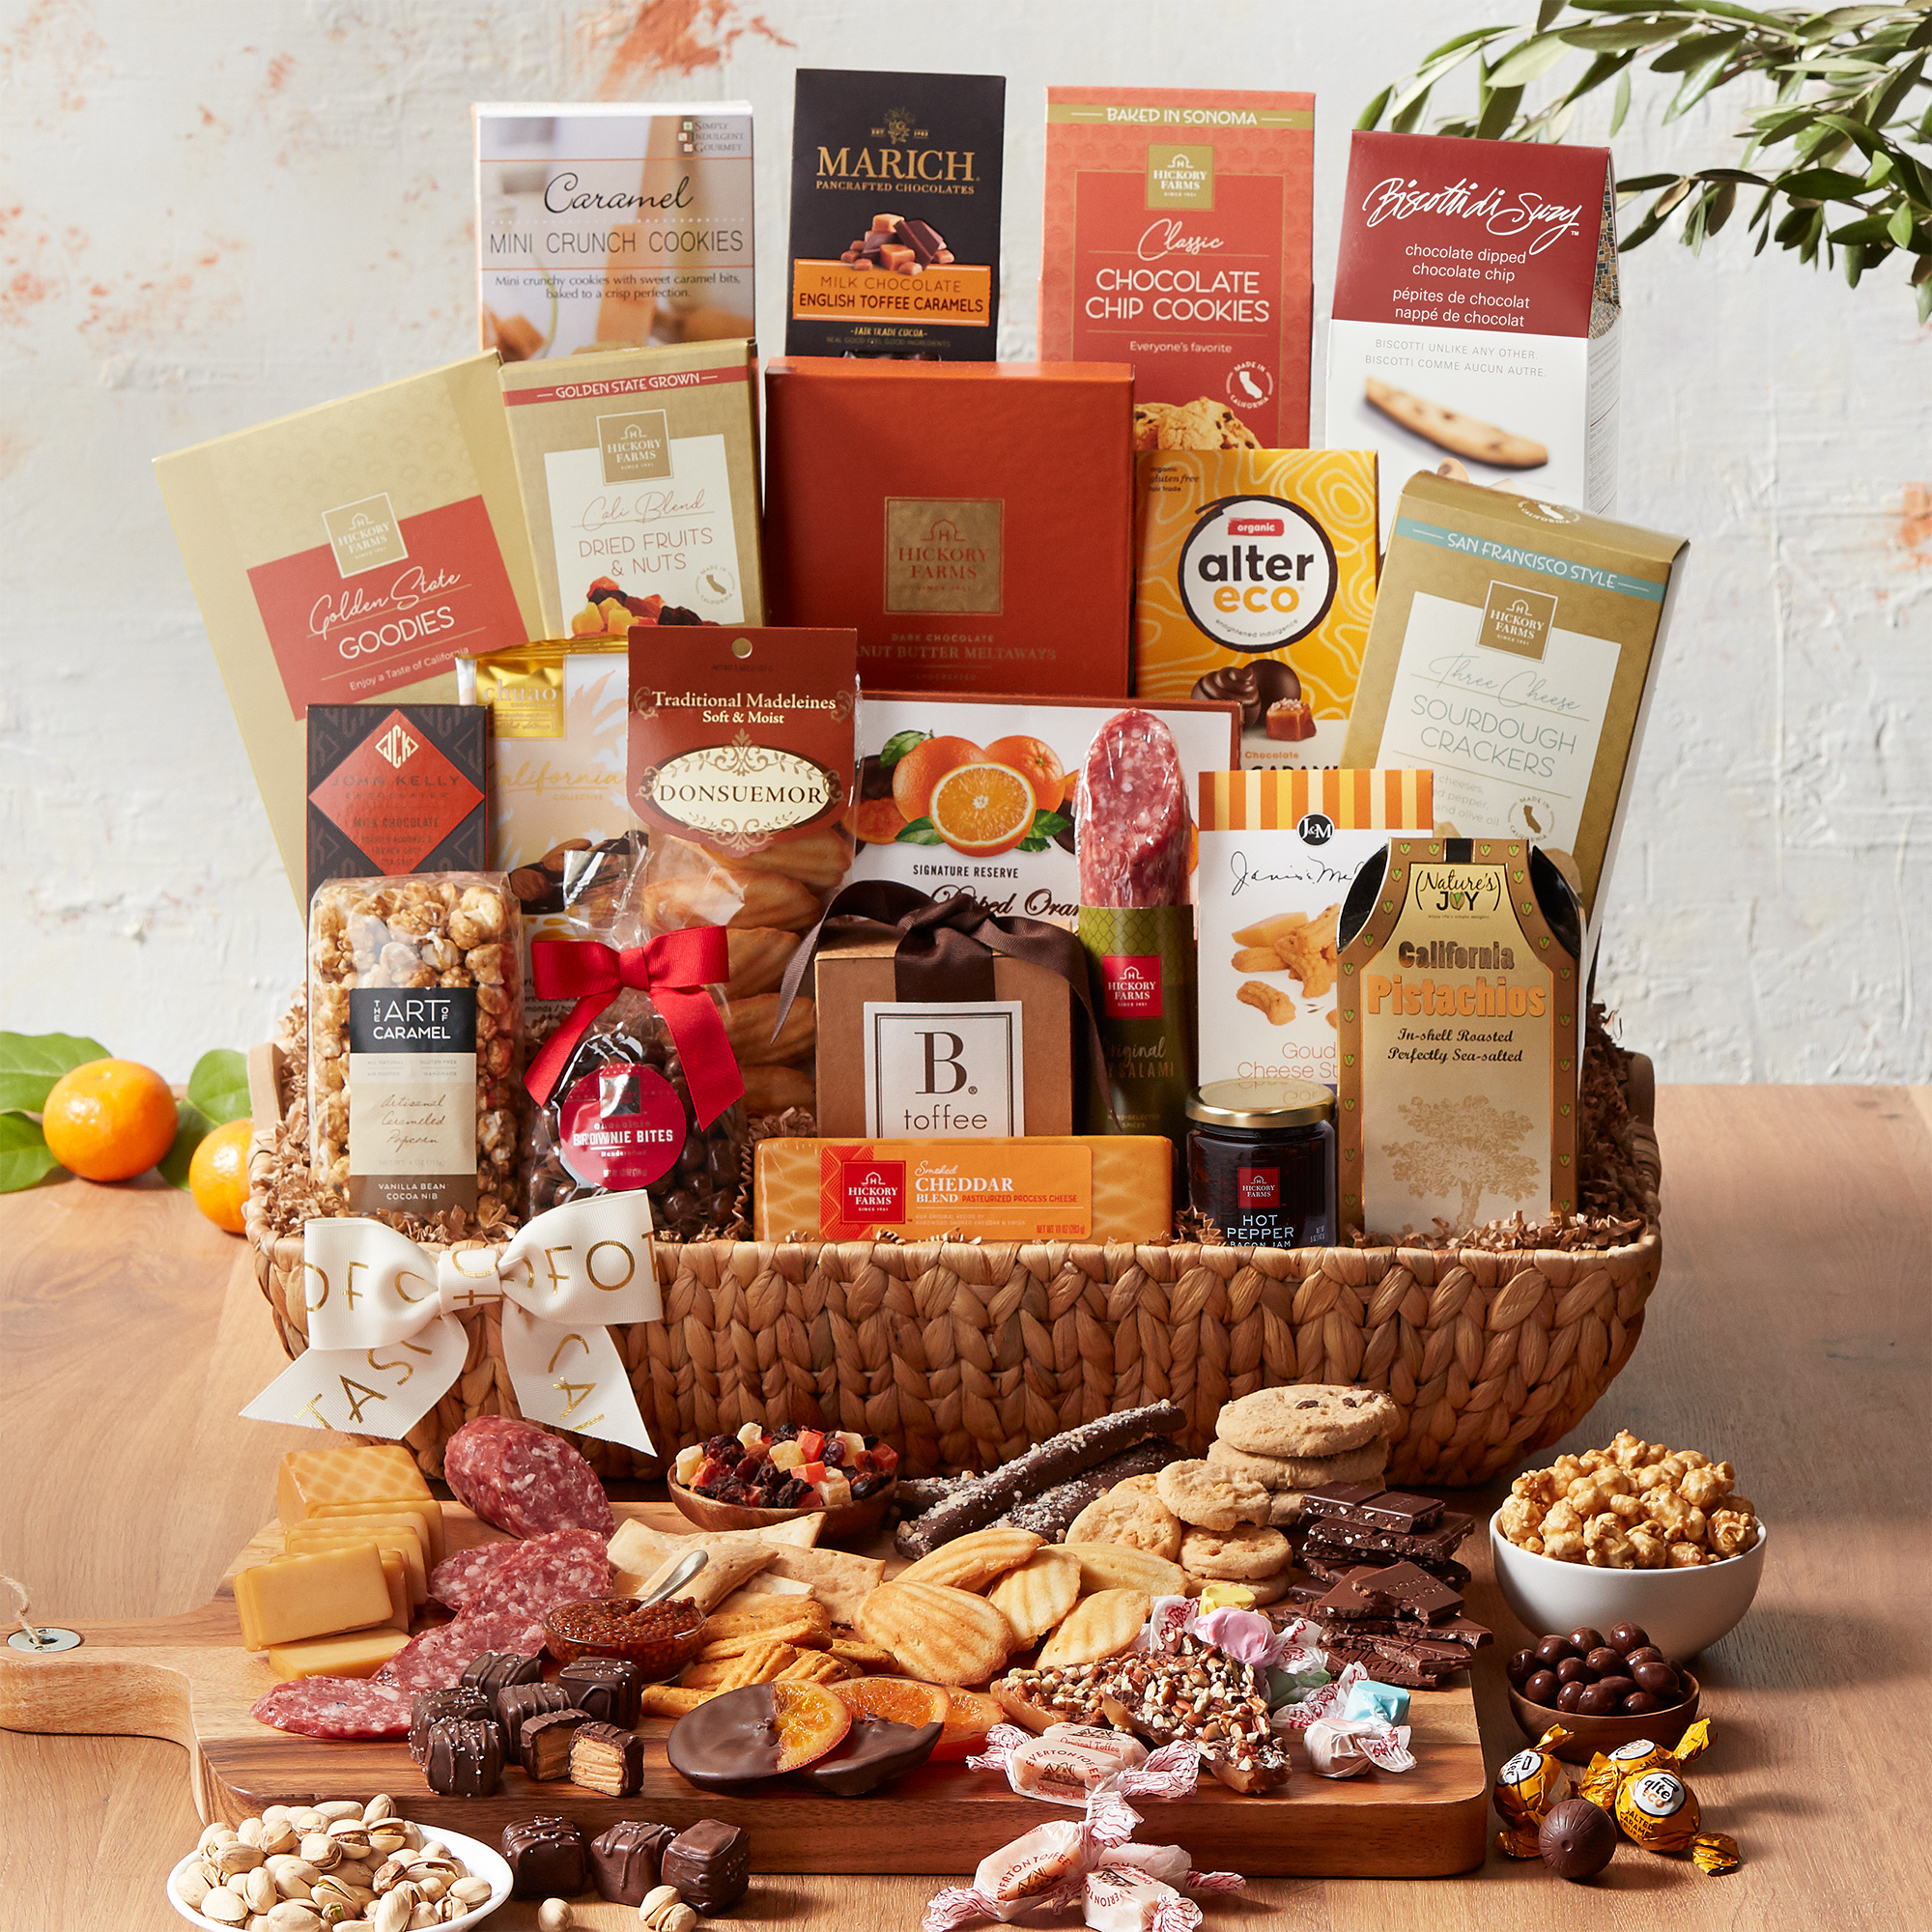 https://www.hickoryfarms.com/on/demandware.static/-/Sites-Web-Master-Catalog/default/dw52e0314a/images/products/ultimate-holiday-crowd-pleasers-gift-basket-007641-1.jpg